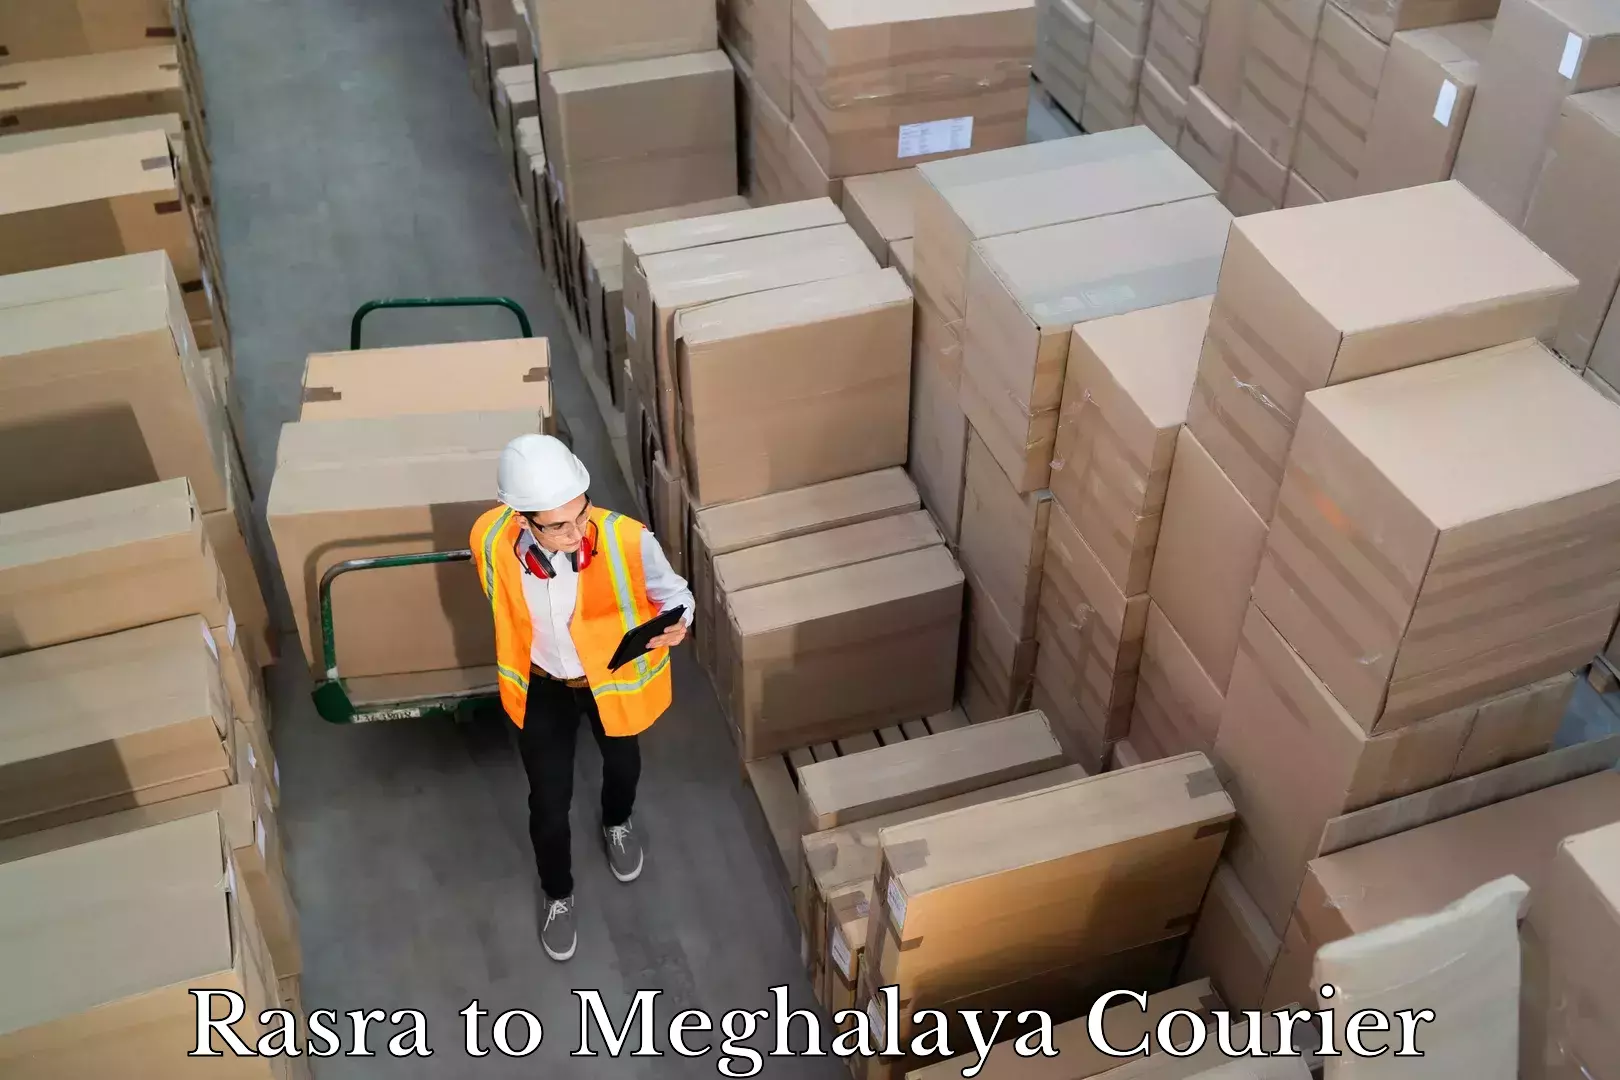 24/7 courier service in Rasra to Meghalaya